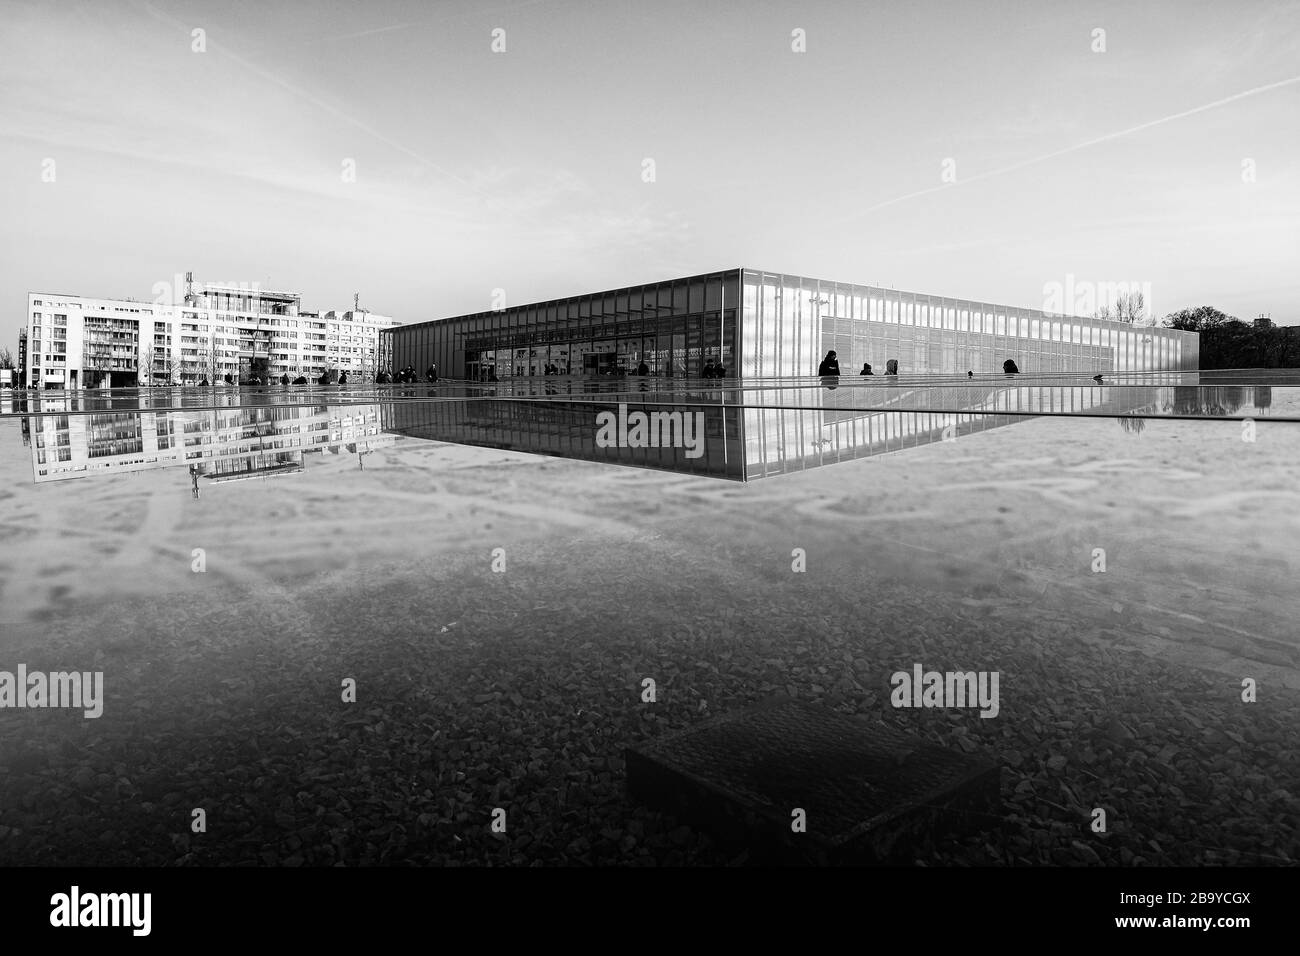 Topography of Terror Documentation Center   on Saturday 29 February 2020 at Niederkirchnerstraße, Berlin.  During the 'Third Reich' the headquarters of the Secret State Police, the SS and the Reich Security Main Office were located at the site.. Picture by Julie Edwards. Stock Photo